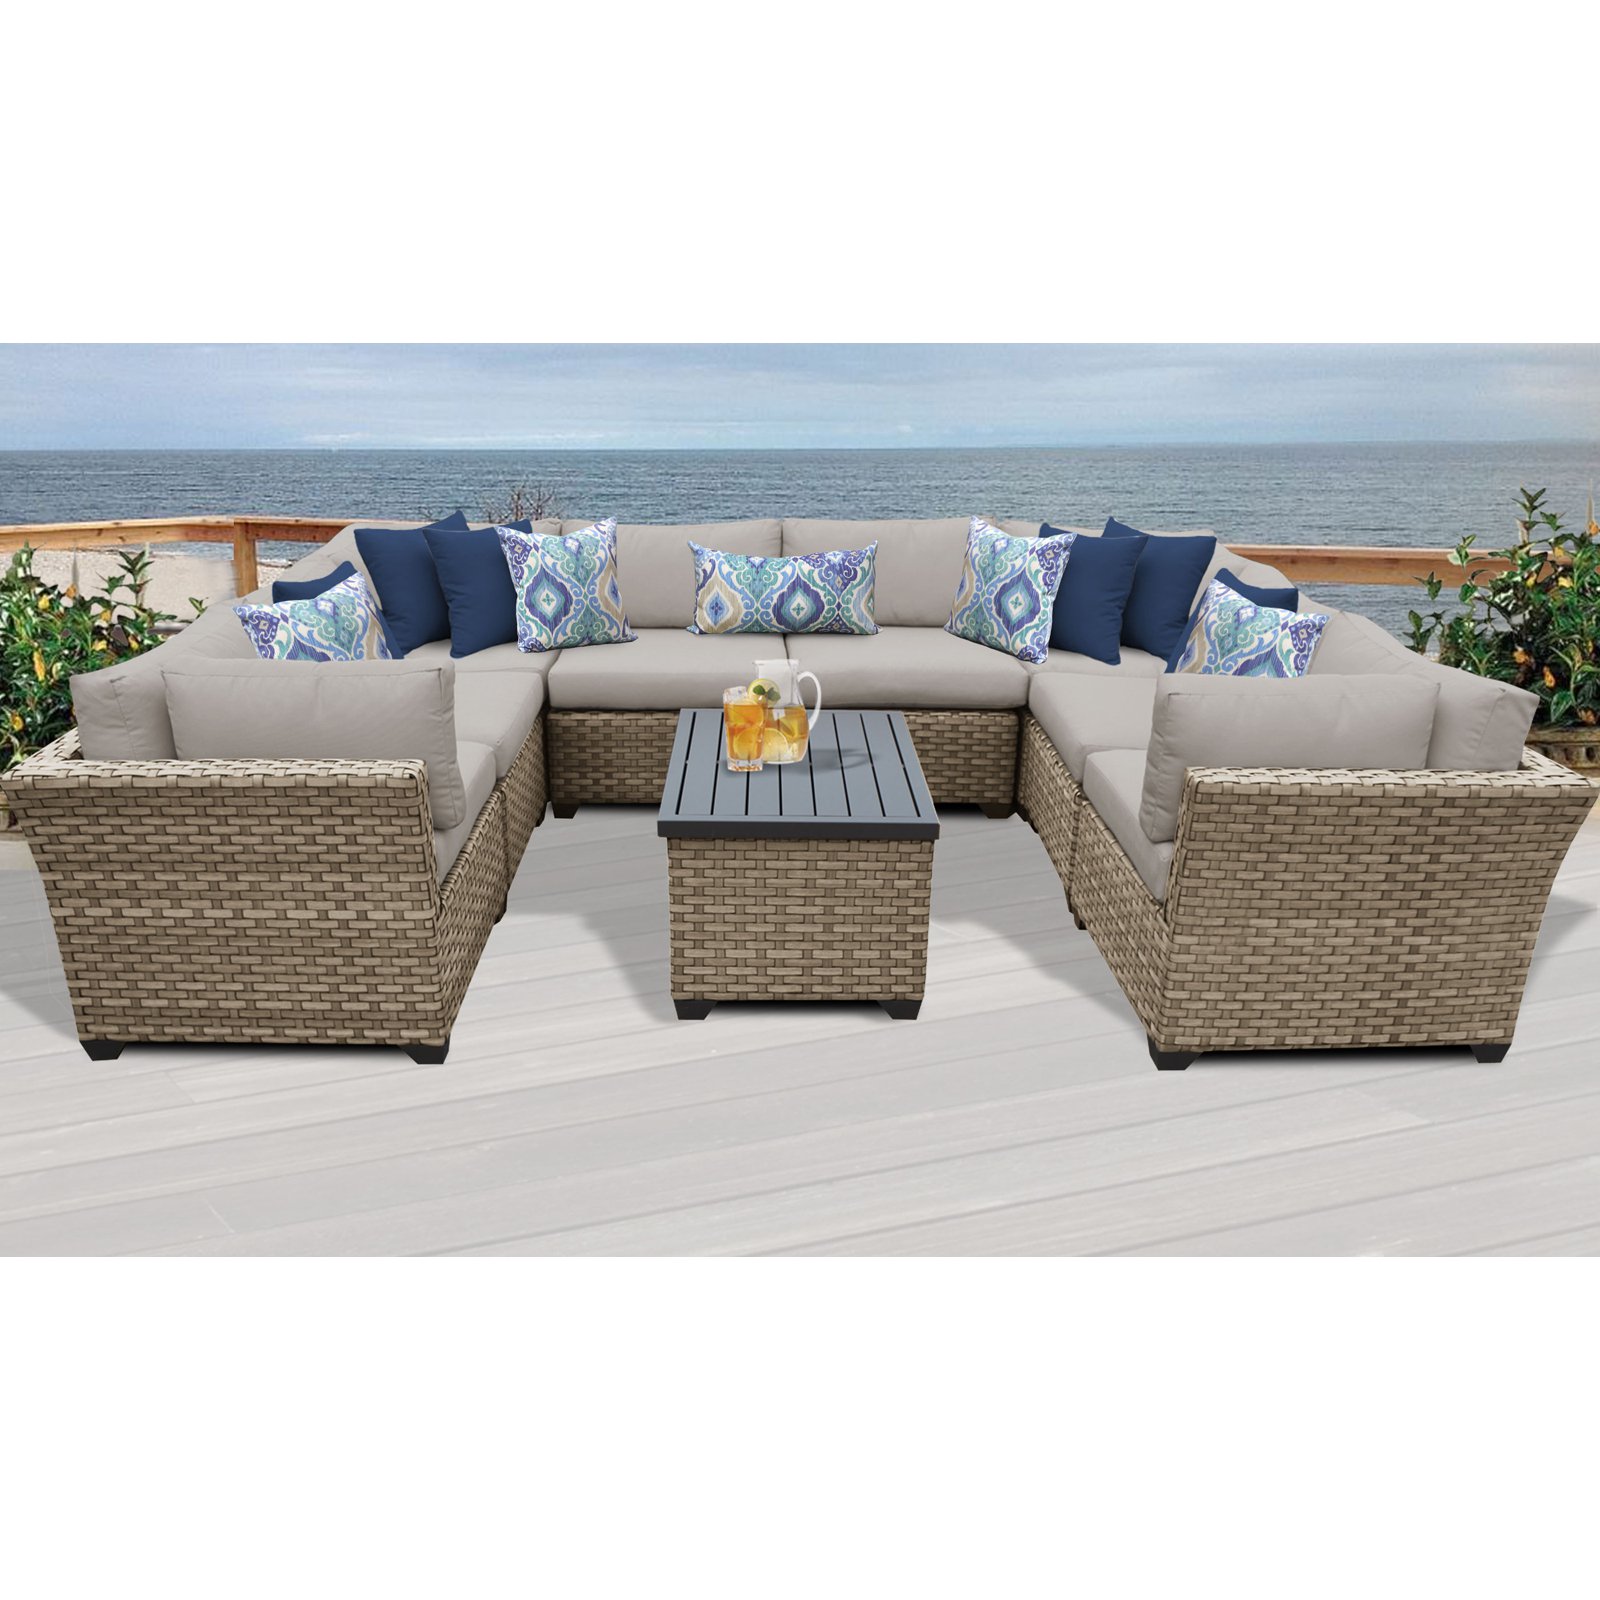 TK Classics Monterey Wicker 9 Piece Patio Conversation Set with Coffee Table and 2 Sets of Cushion Covers - image 3 of 5